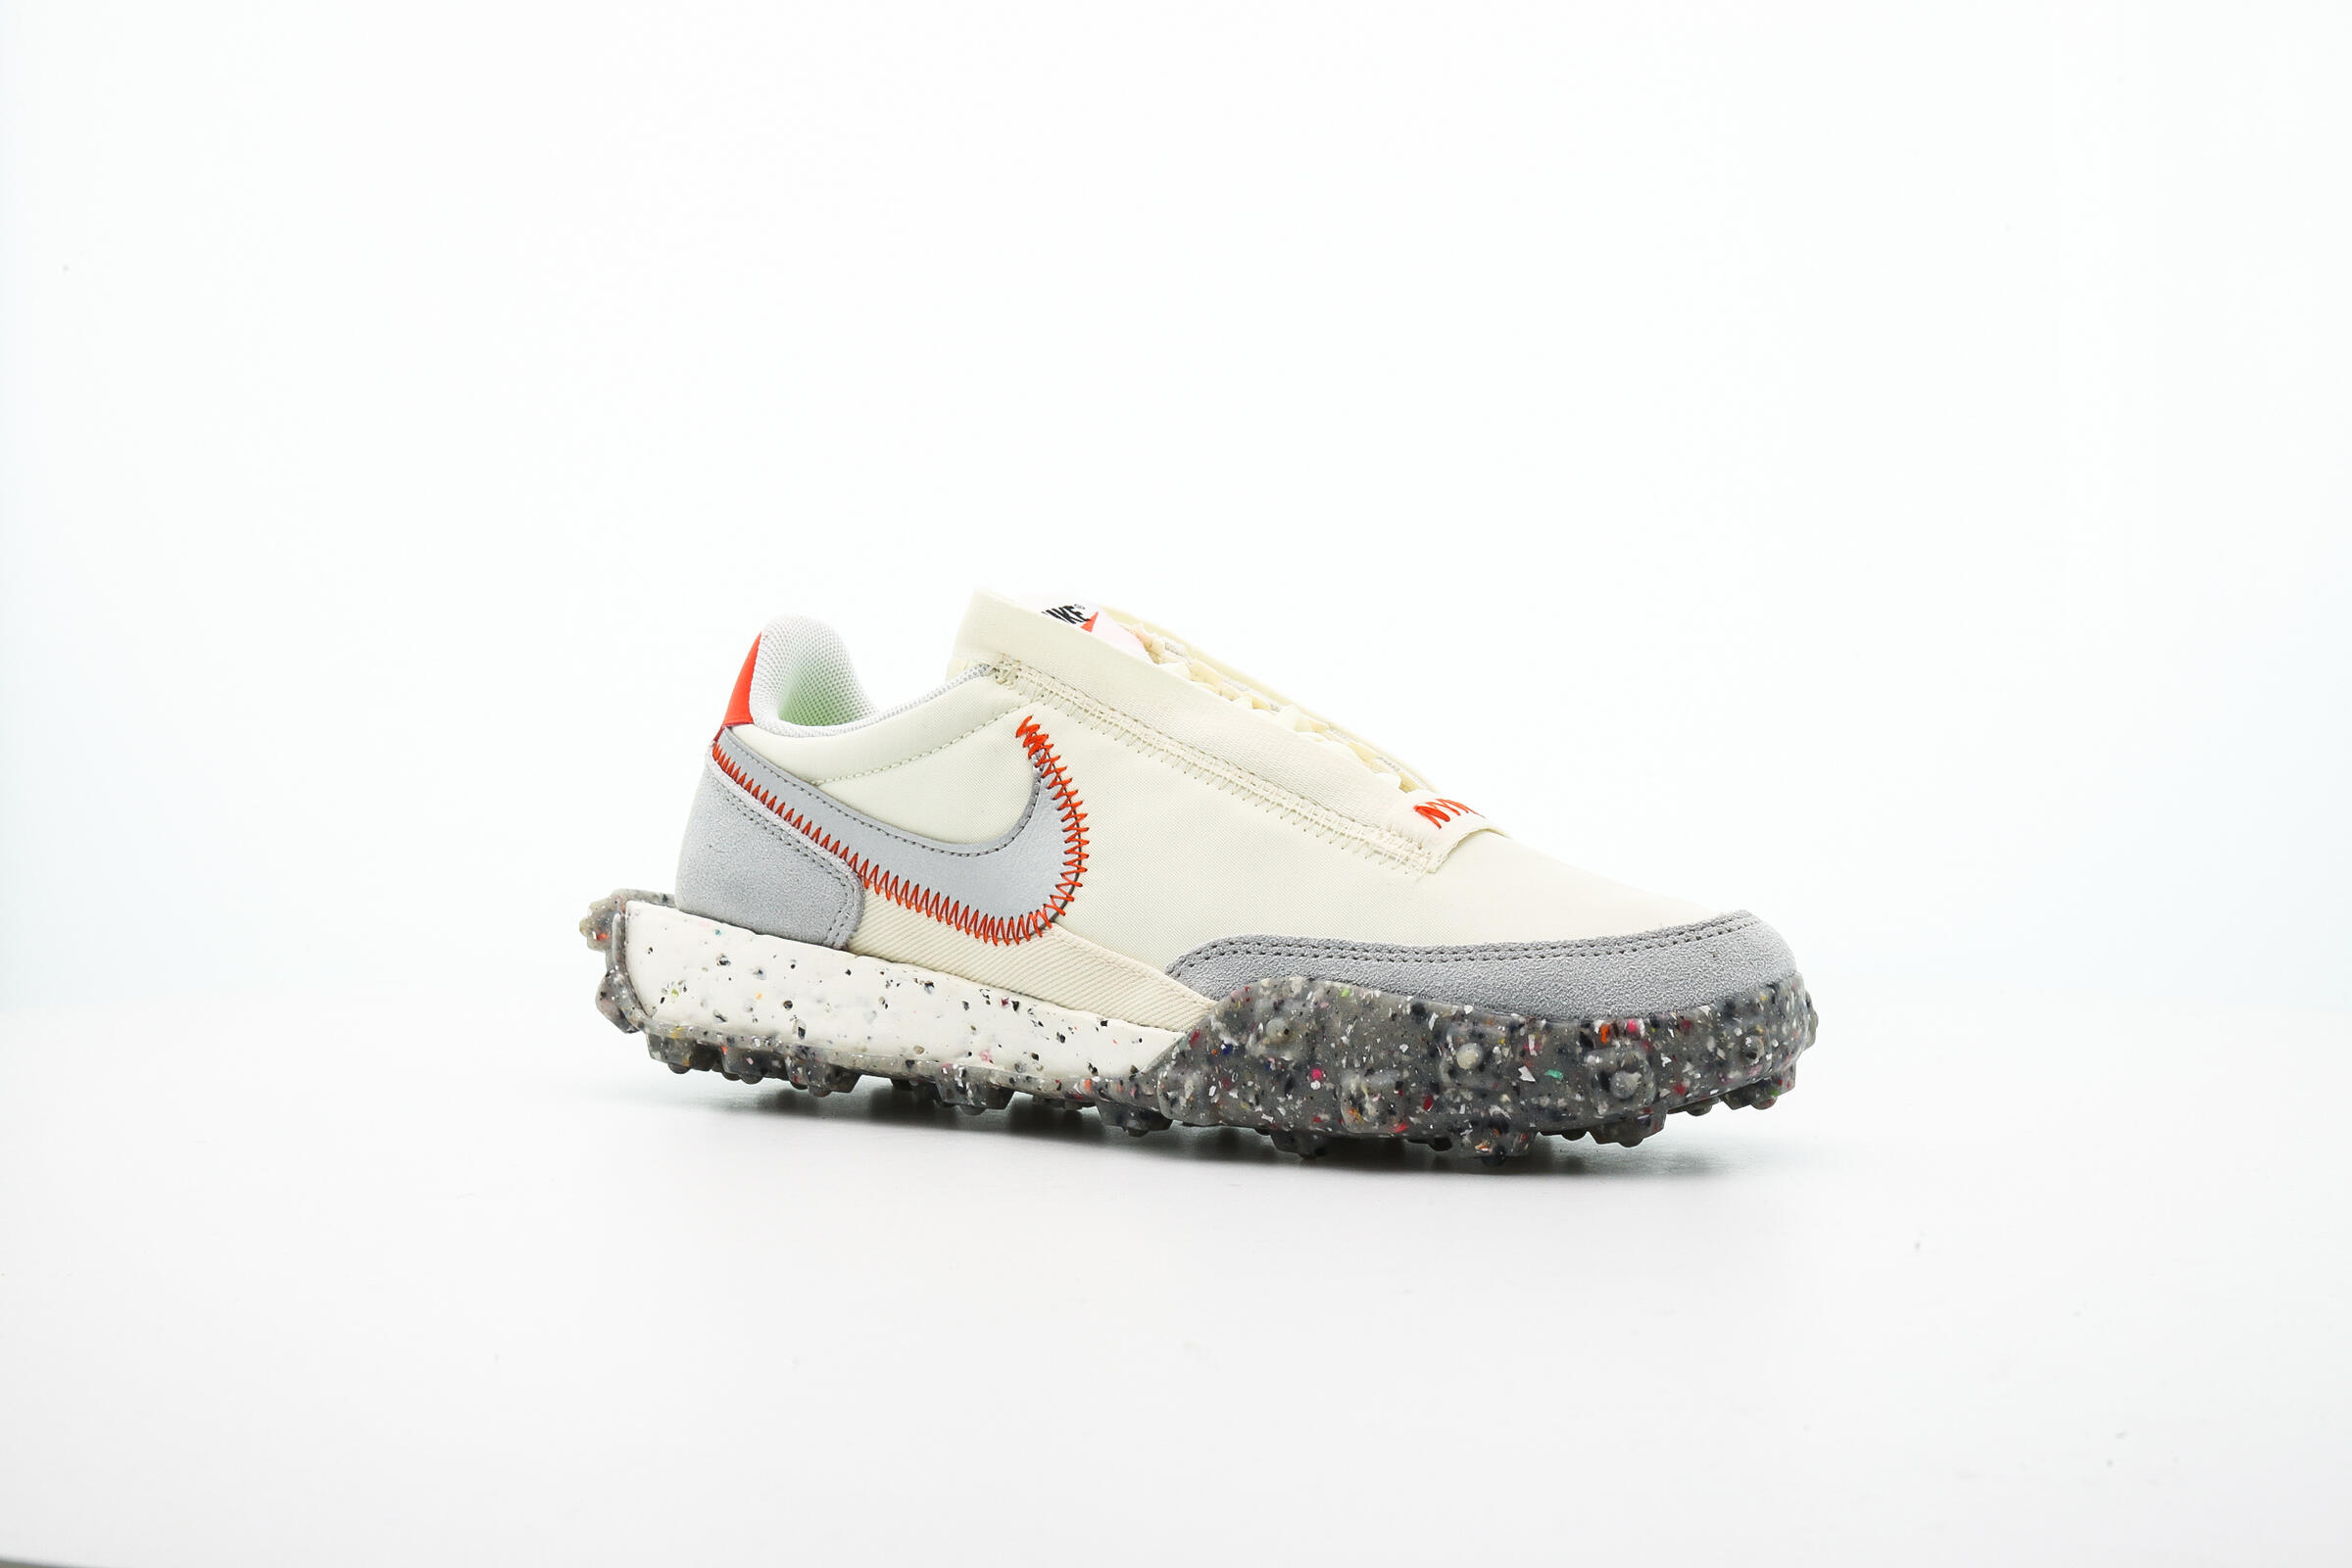 Nike WAFFLE RACER CRATER "COCONUT MILK"